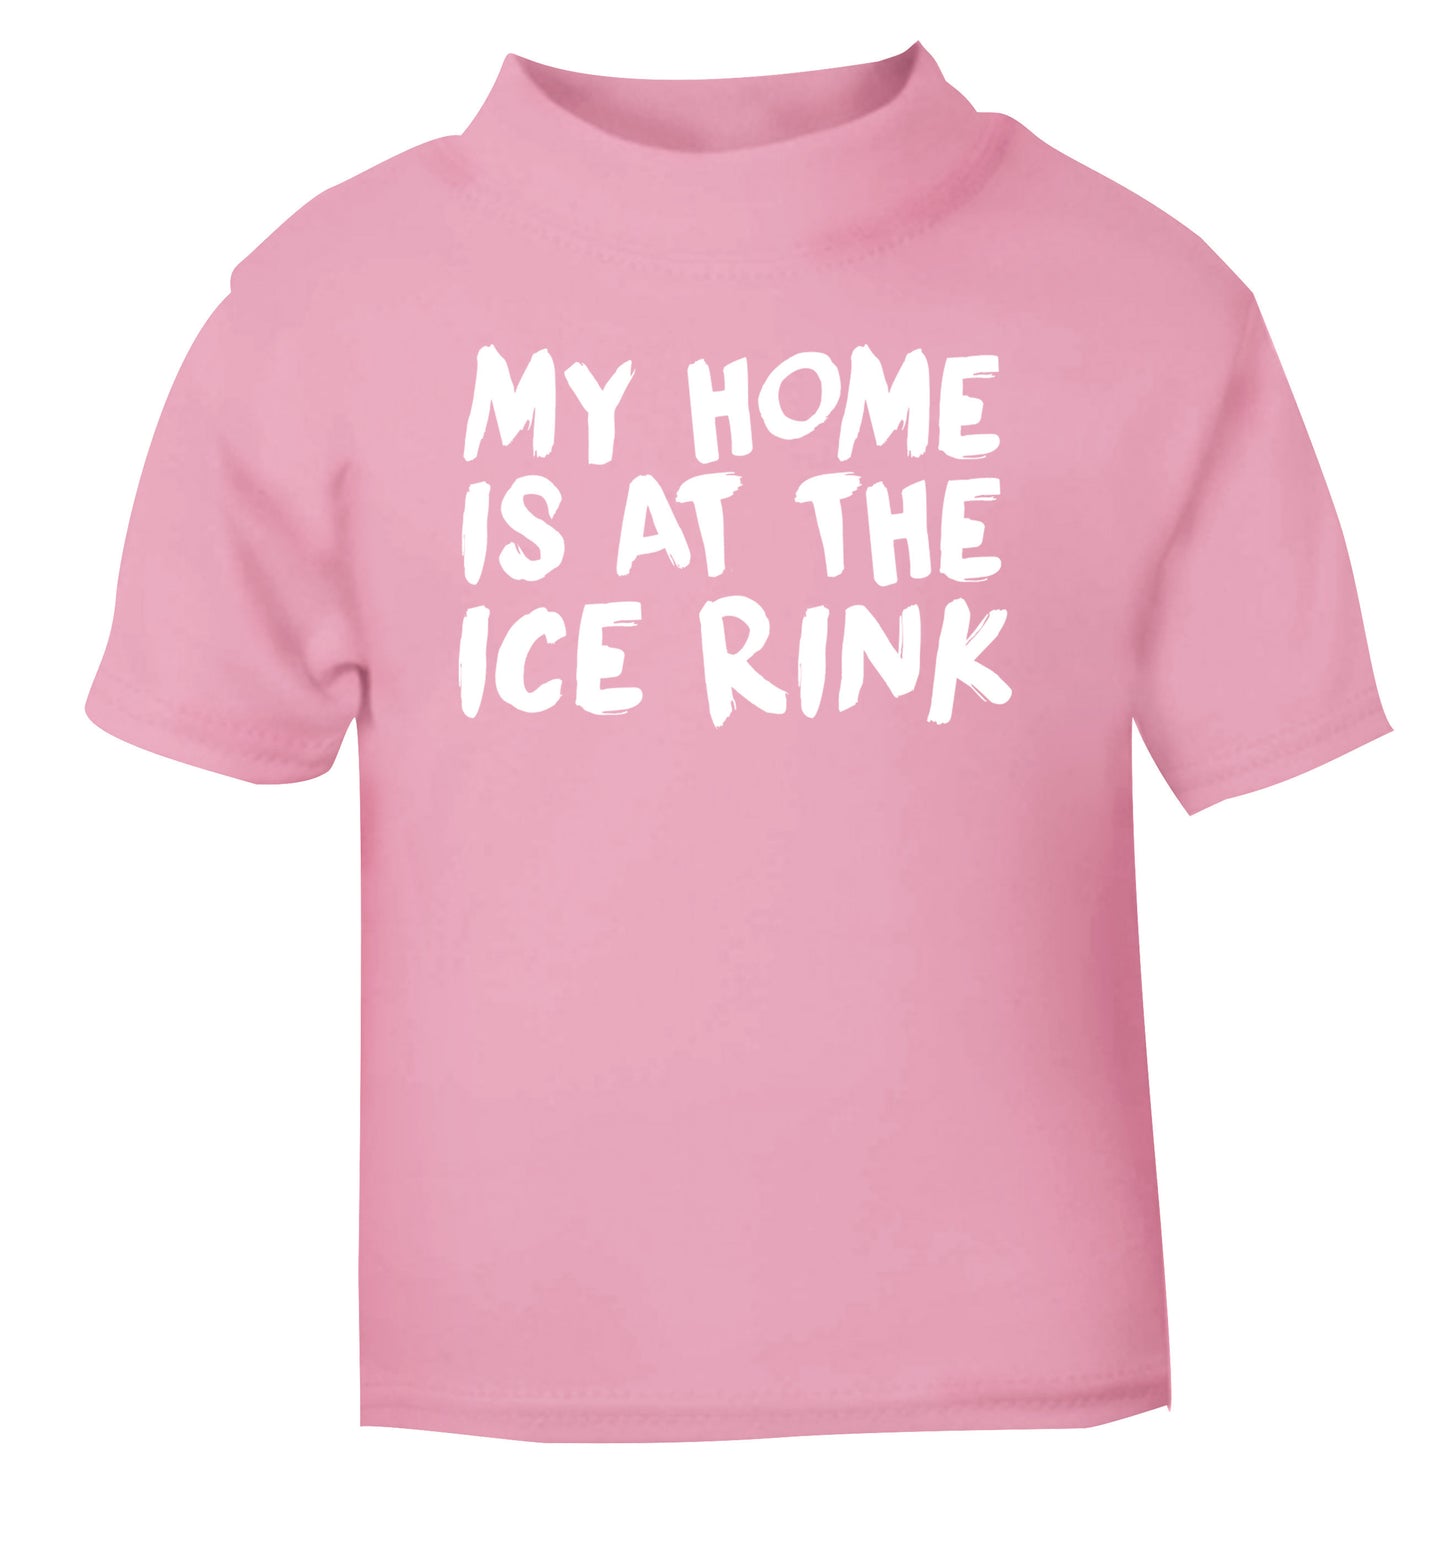 My home is at the ice rink light pink Baby Toddler Tshirt 2 Years